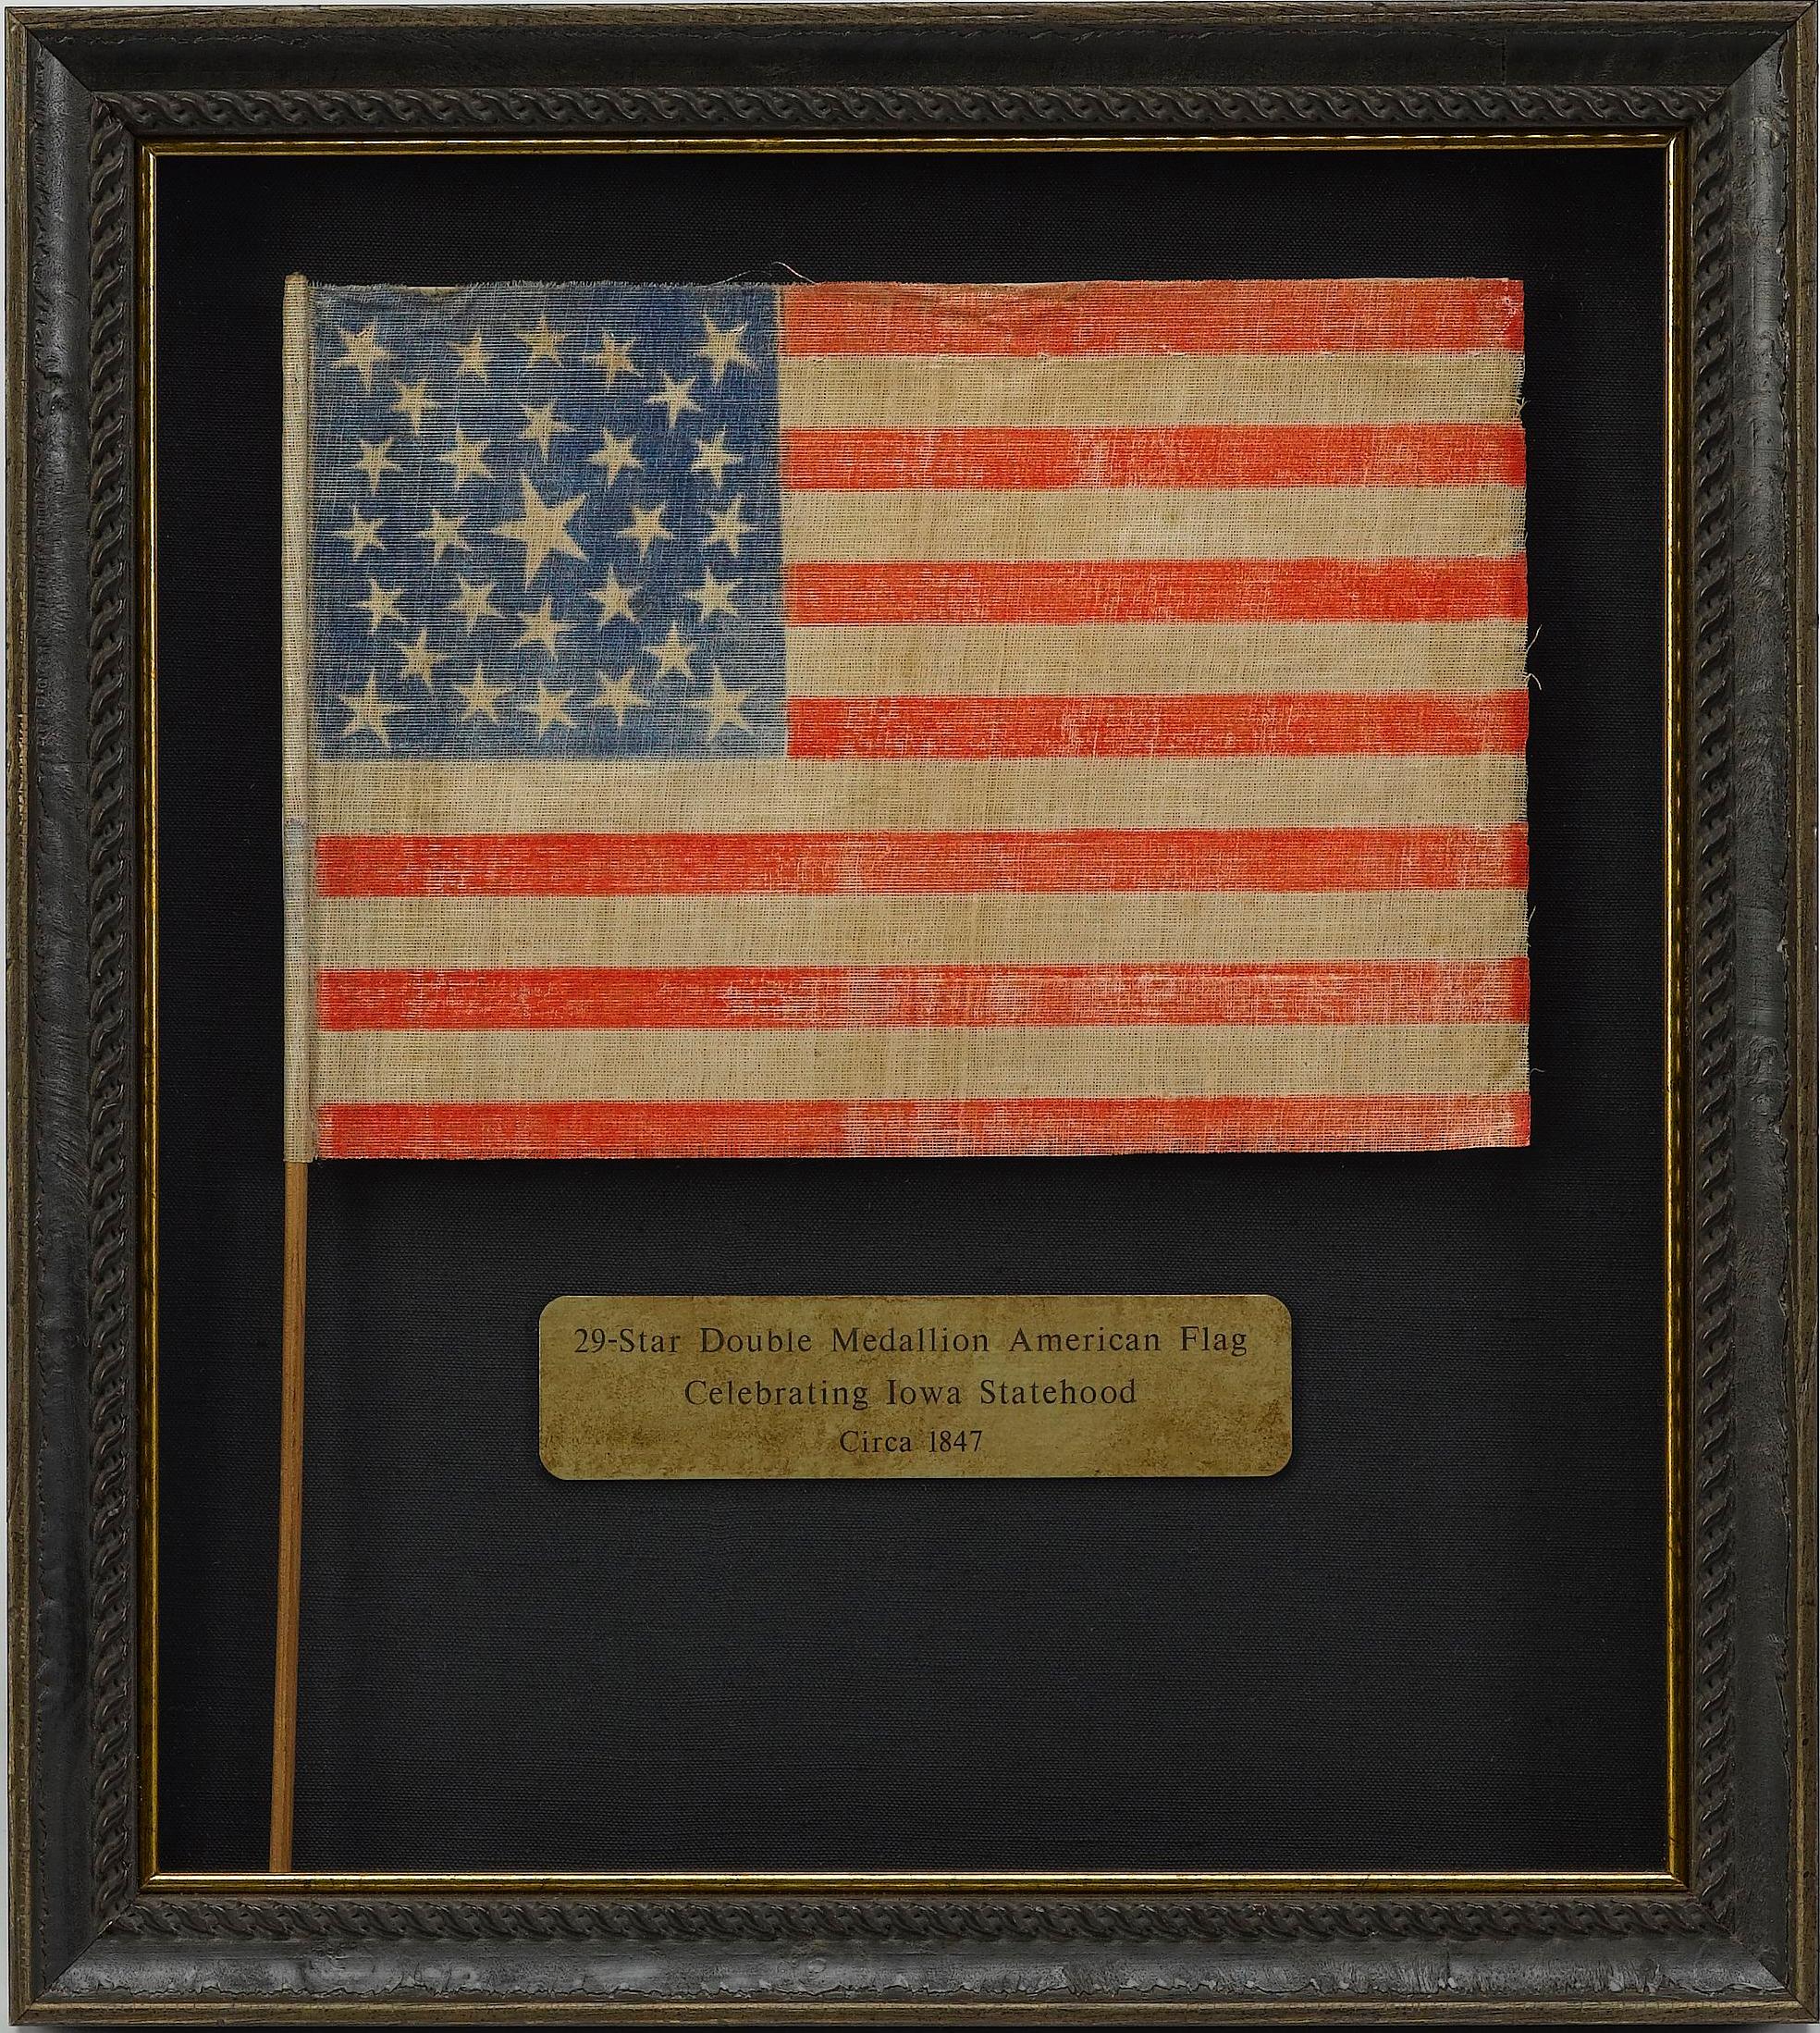 This is a rare 29-star medallion American flag, celebrating the addition of Iowa to the Union. The flag is printed on glazed muslin, and has a spectacularly unique star pattern. A double medallion of stars surrounds a large central star. The large